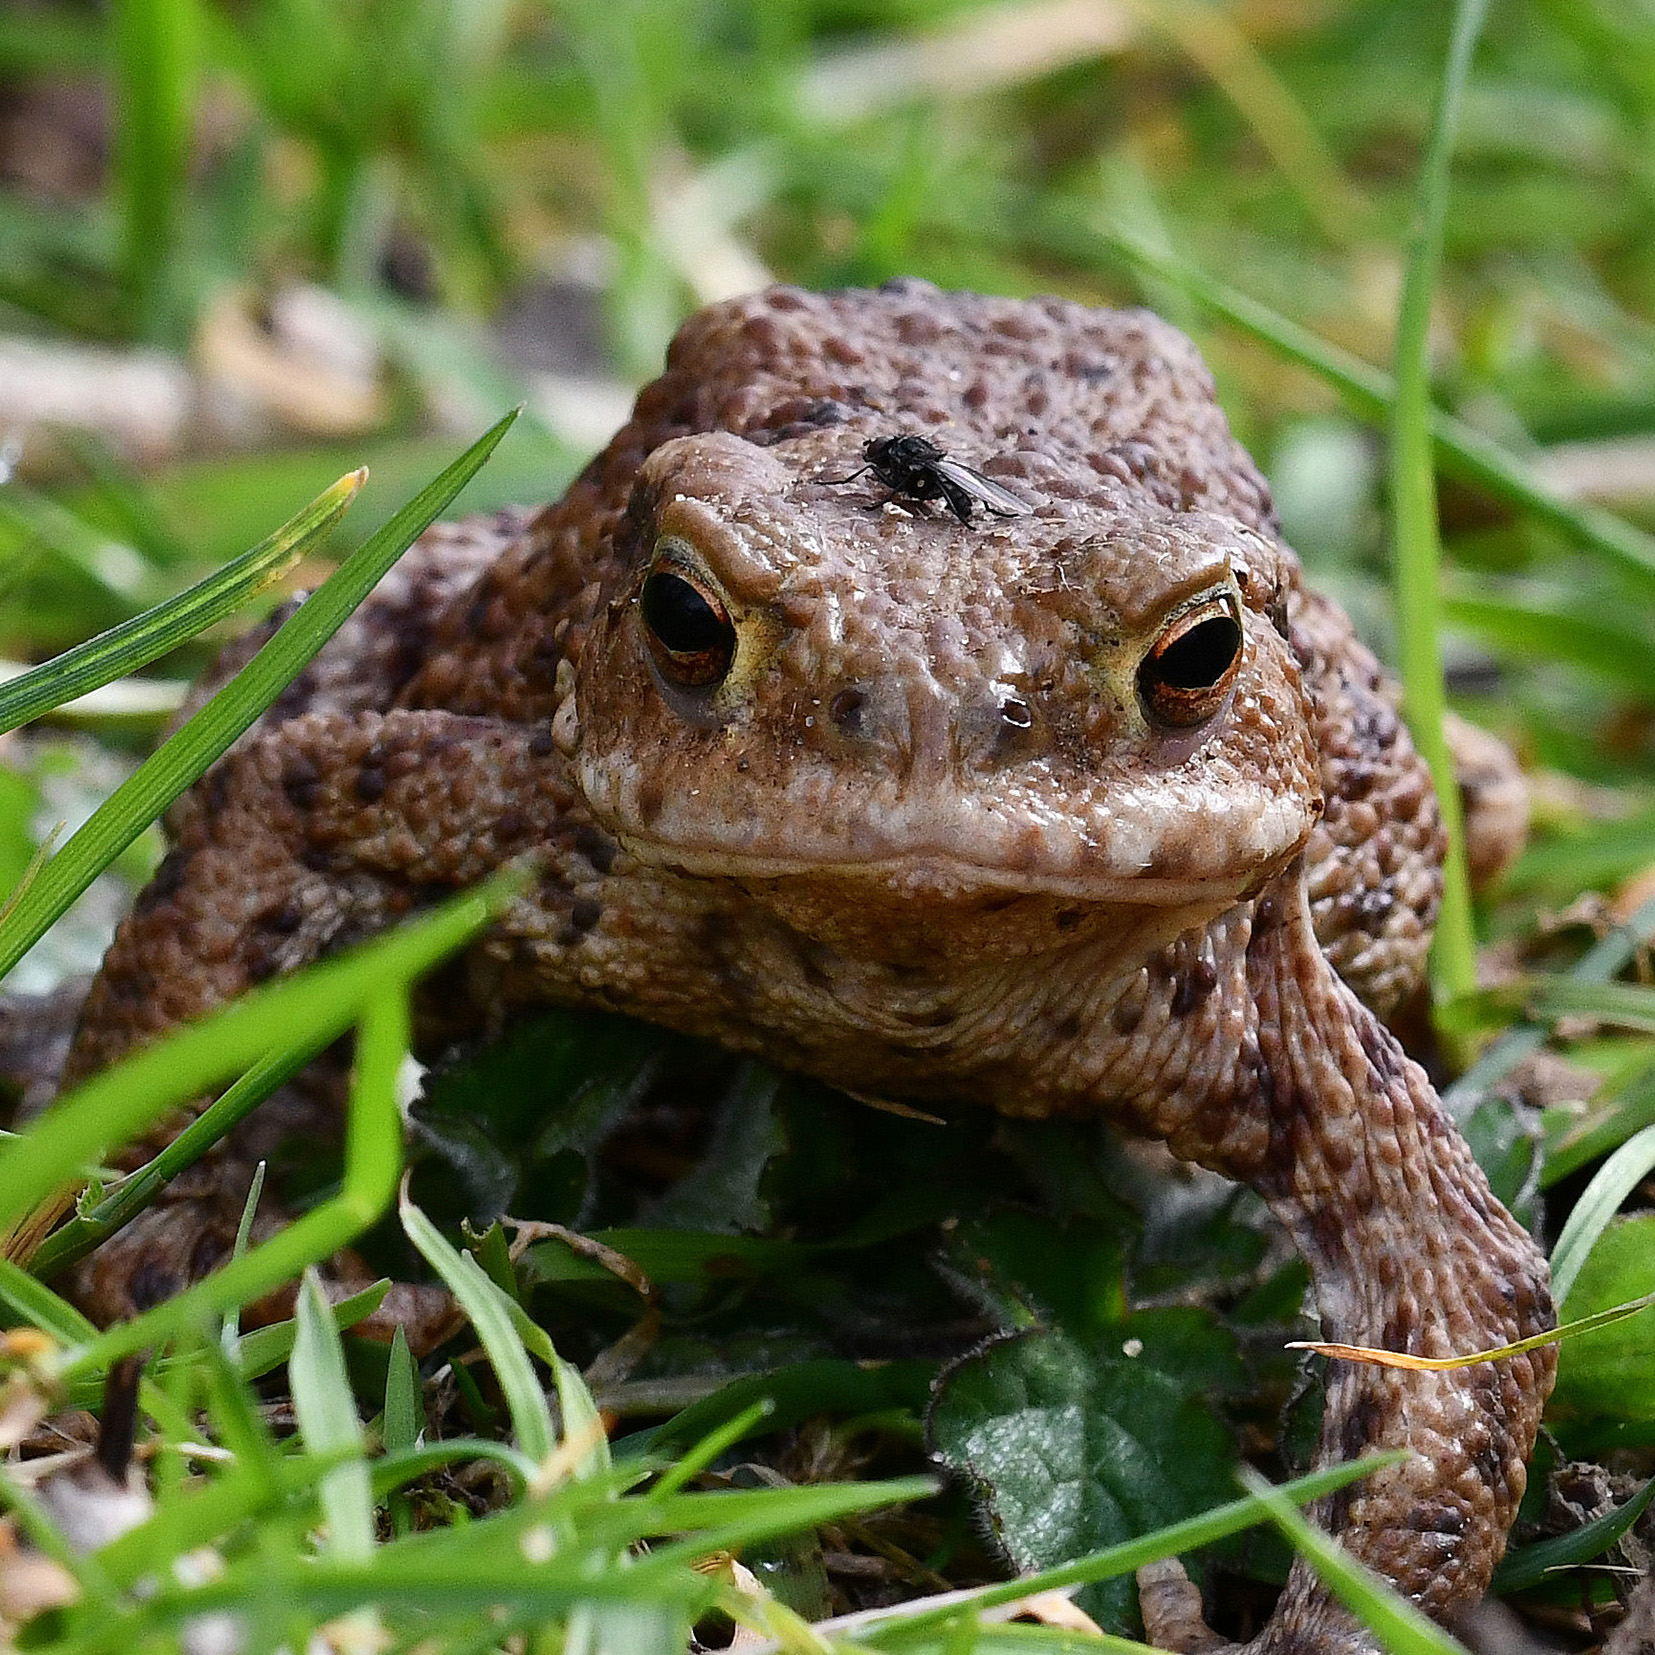 a common toad sitting in grass looking directly at the camera